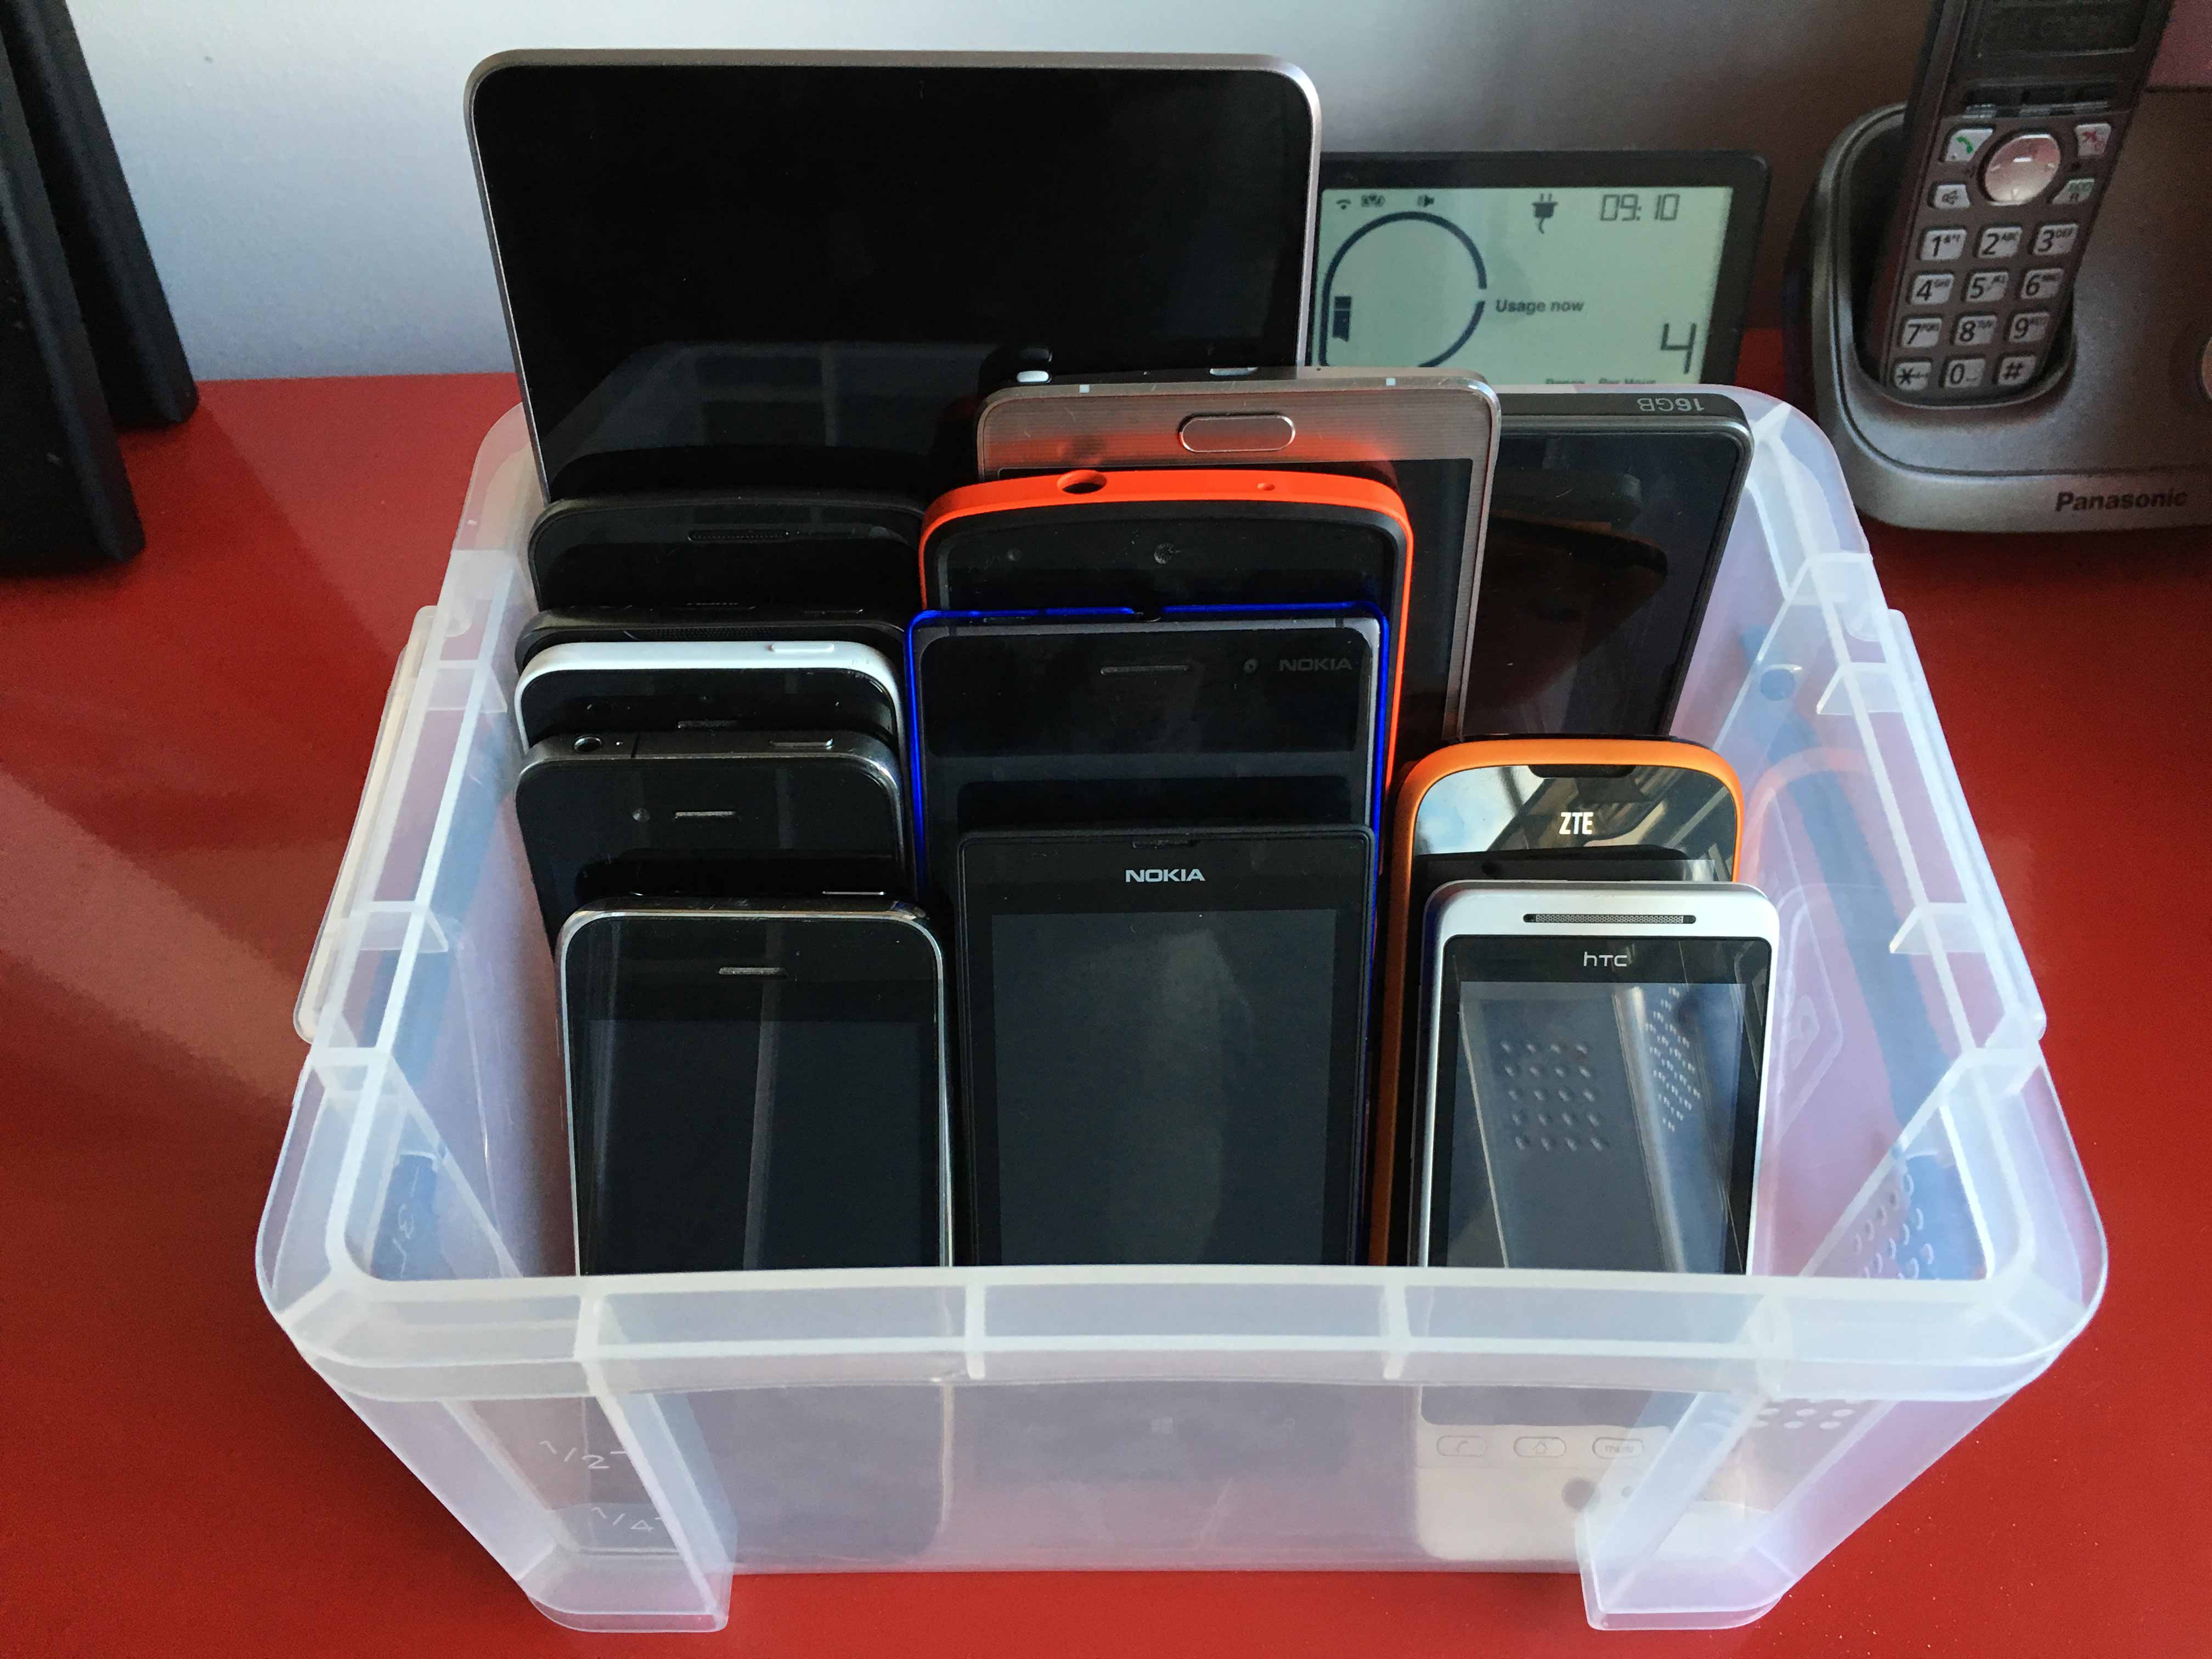 Large number of mobile phone/tablet test devices